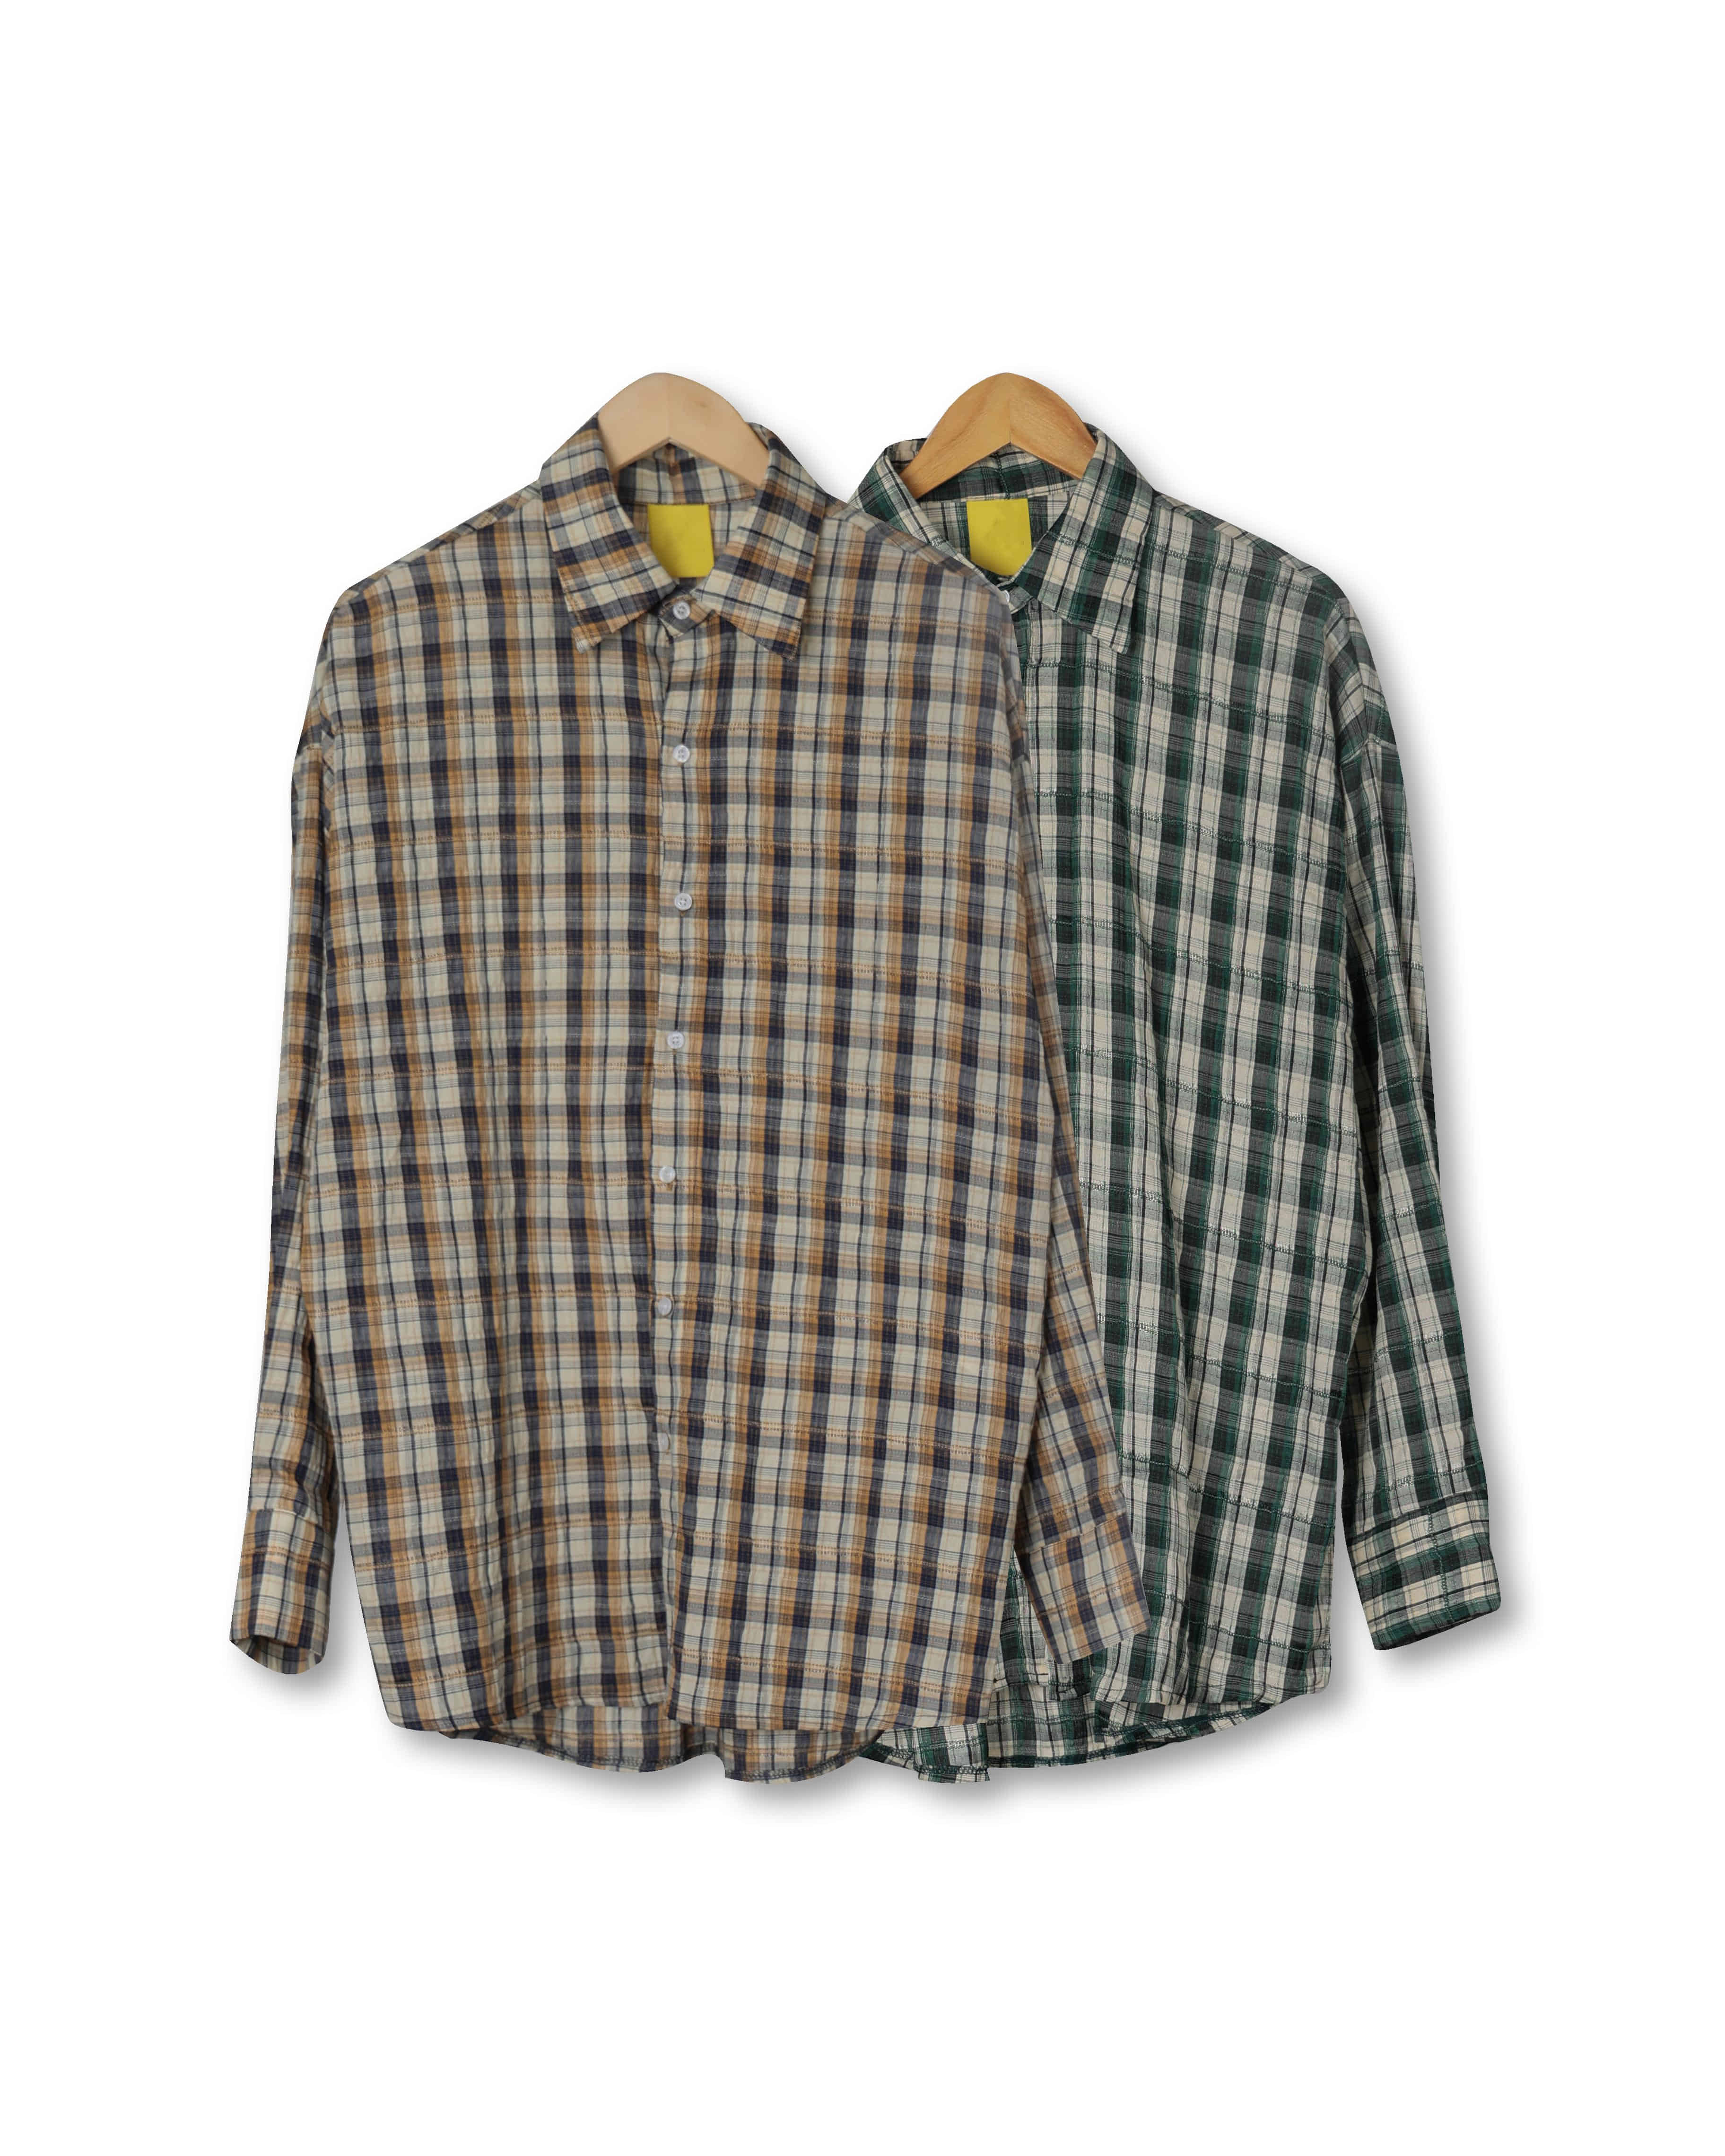 B.ATTEN Wrinkle Text Casual Check Shirts (Green/Beige)